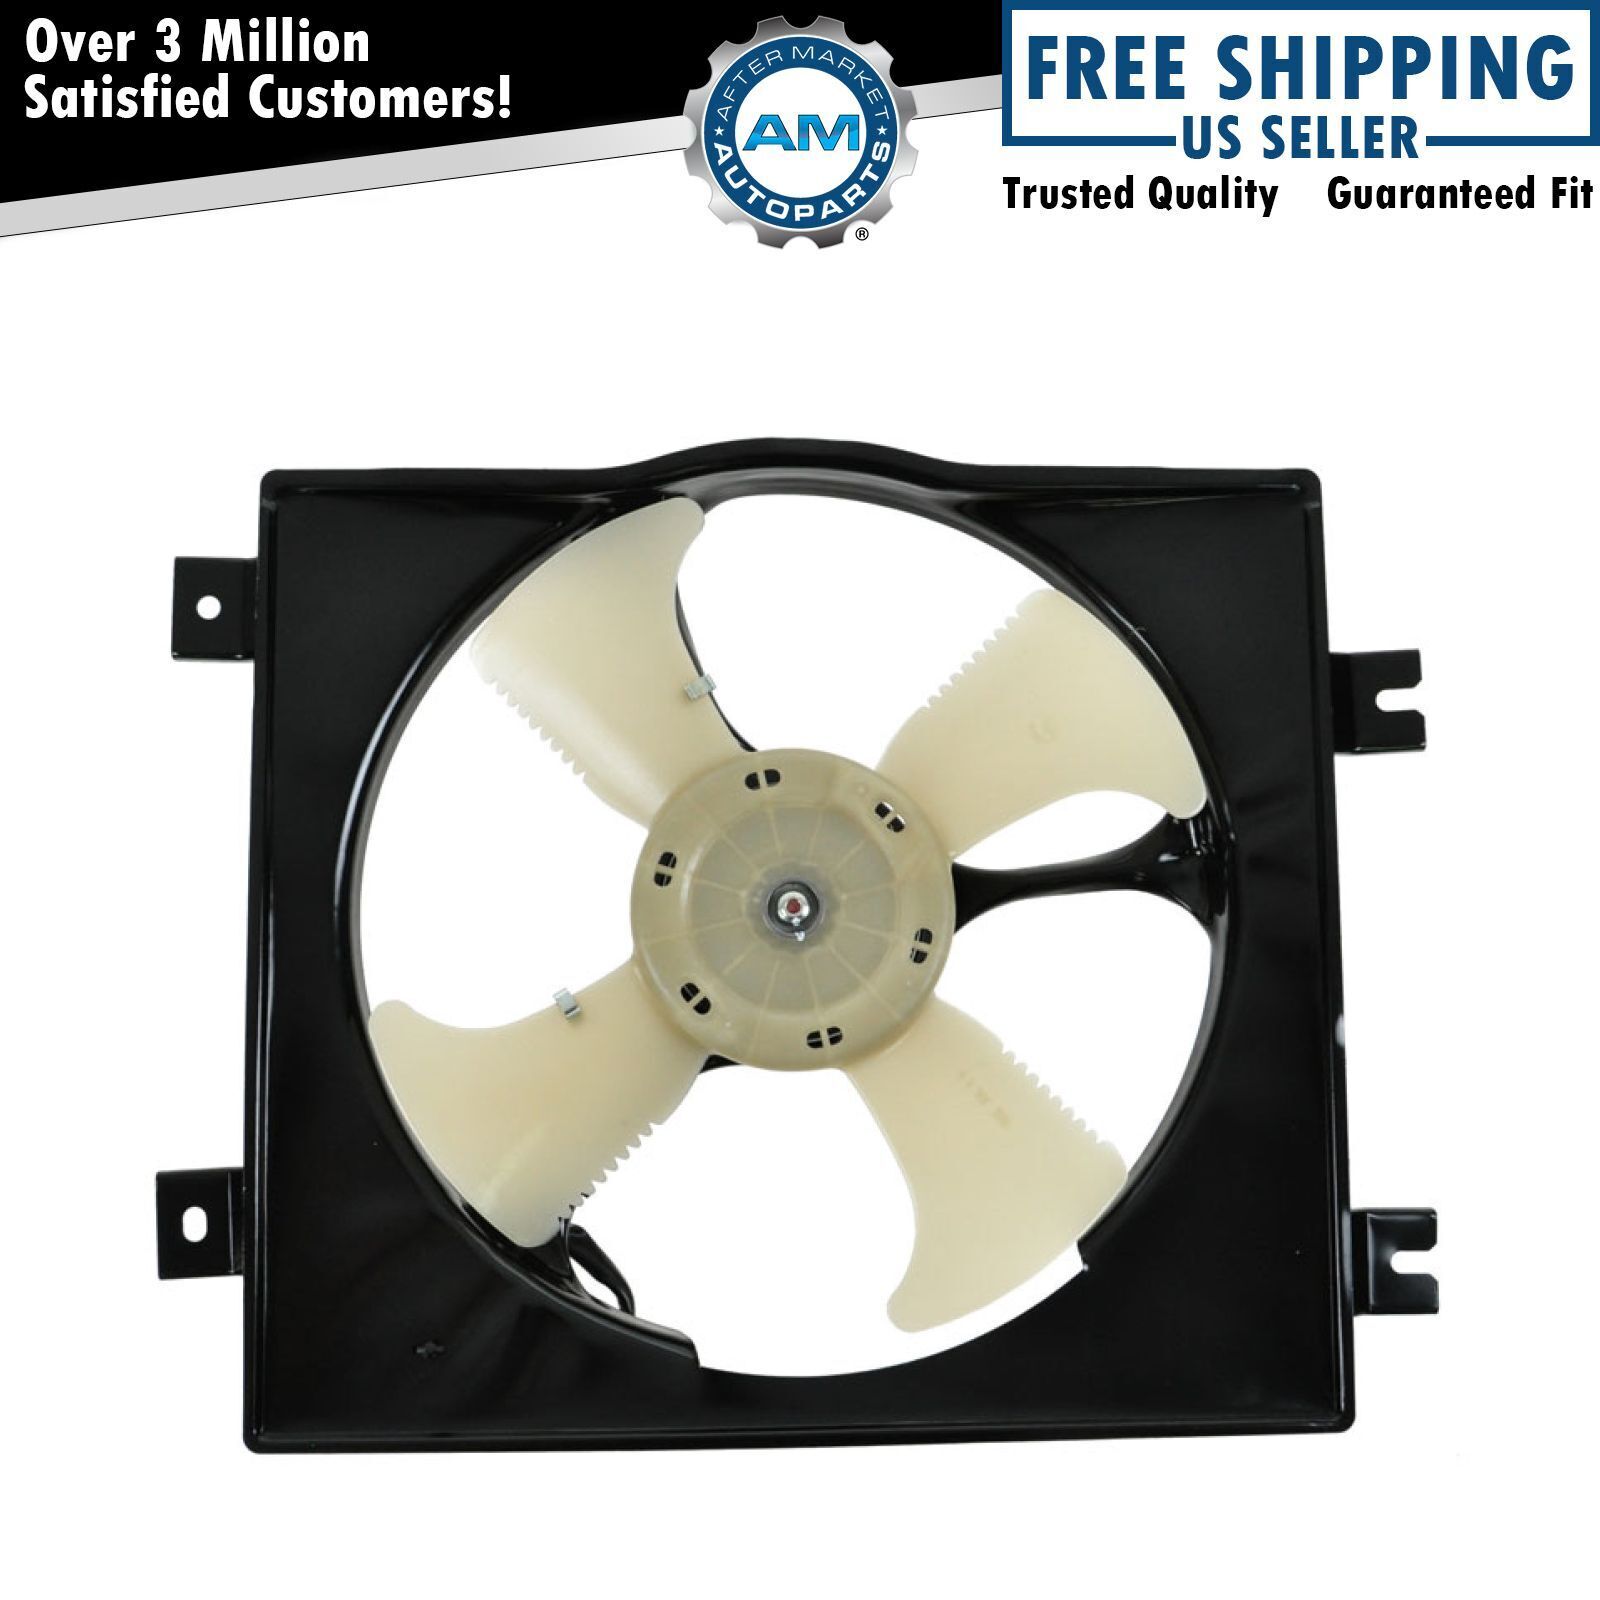 A/C AC Radiator Condenser Cooling Fan for 97-04 Diamante